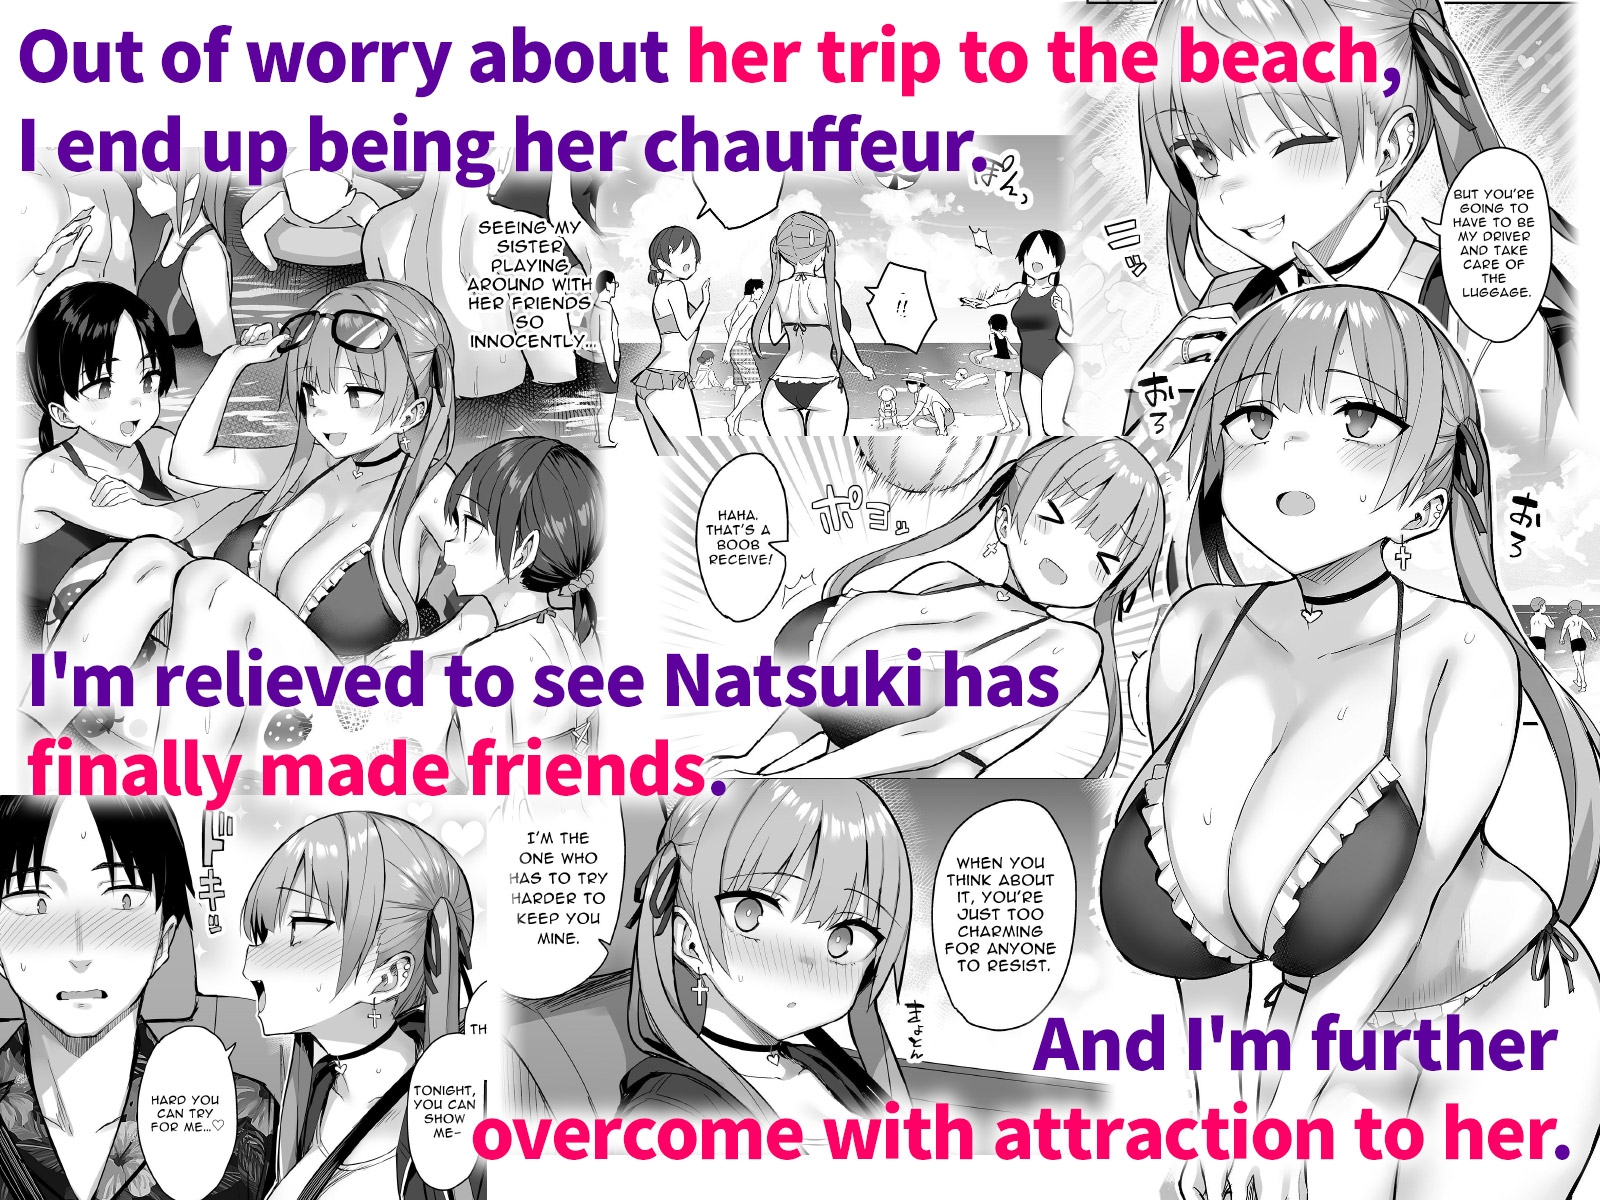 [ENG Ver.] I Can't Handle My Former Bookworm Little Sister Now That She's a Slut! 3